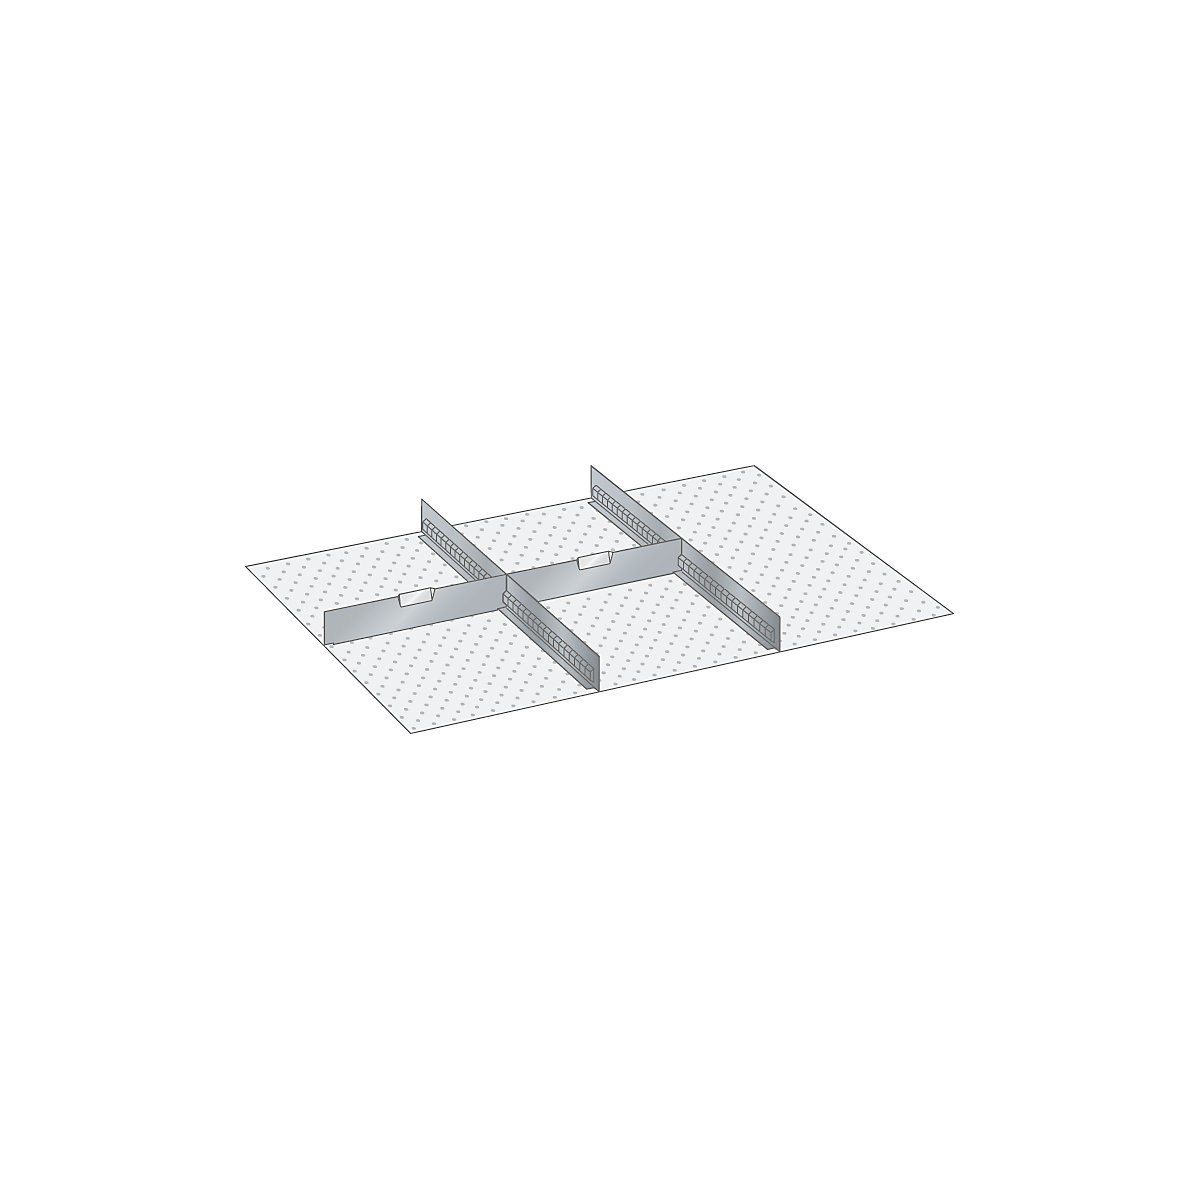 Drawer divider set – LISTA, 2 slotted dividers, 2 partitions, for front height 100, 125 mm-4